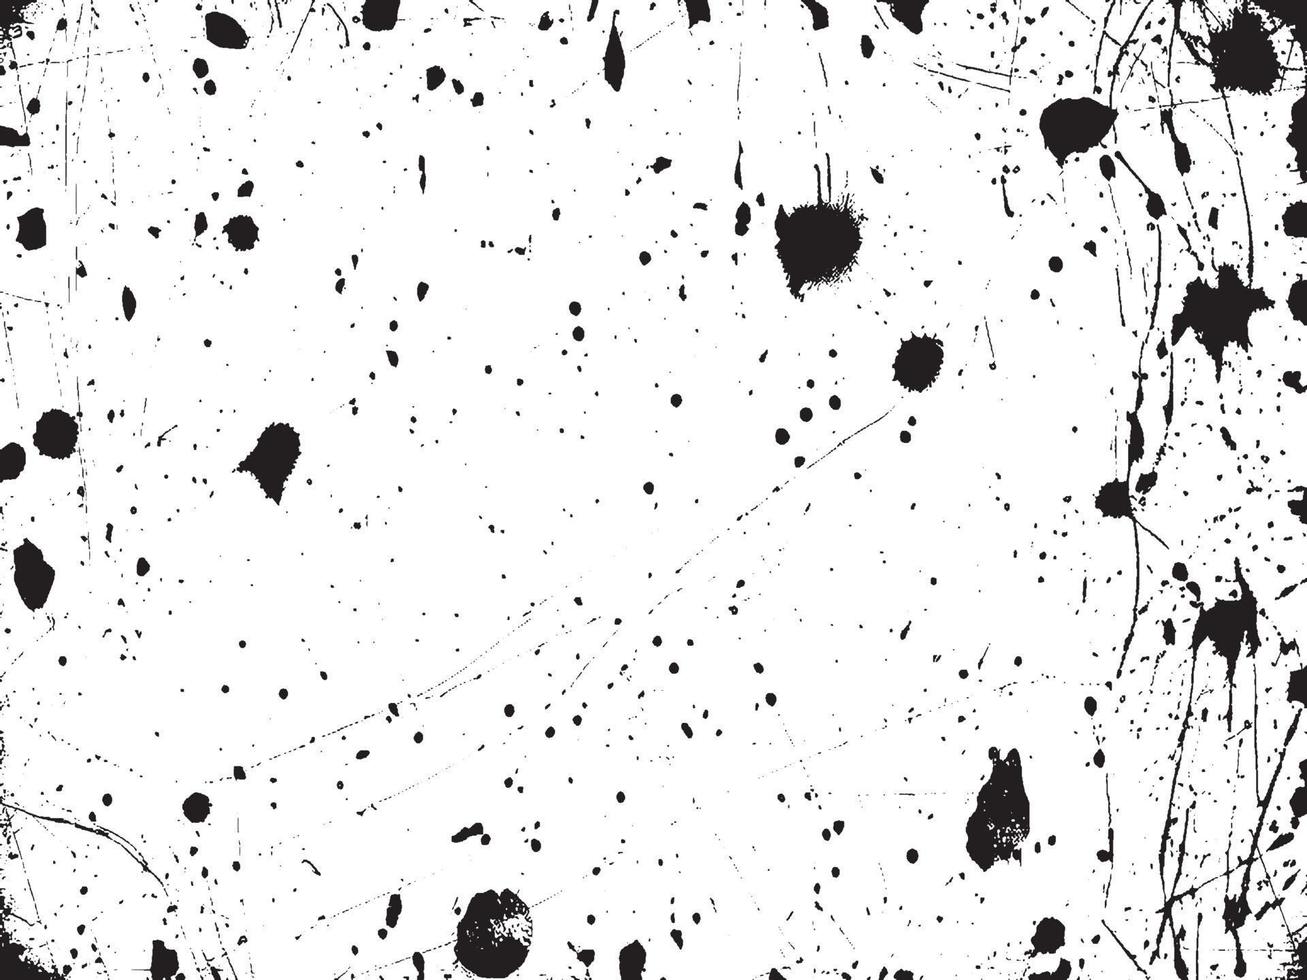 Grunge Black and White Texture. Vector EPS 10 Background with Distress Effects.